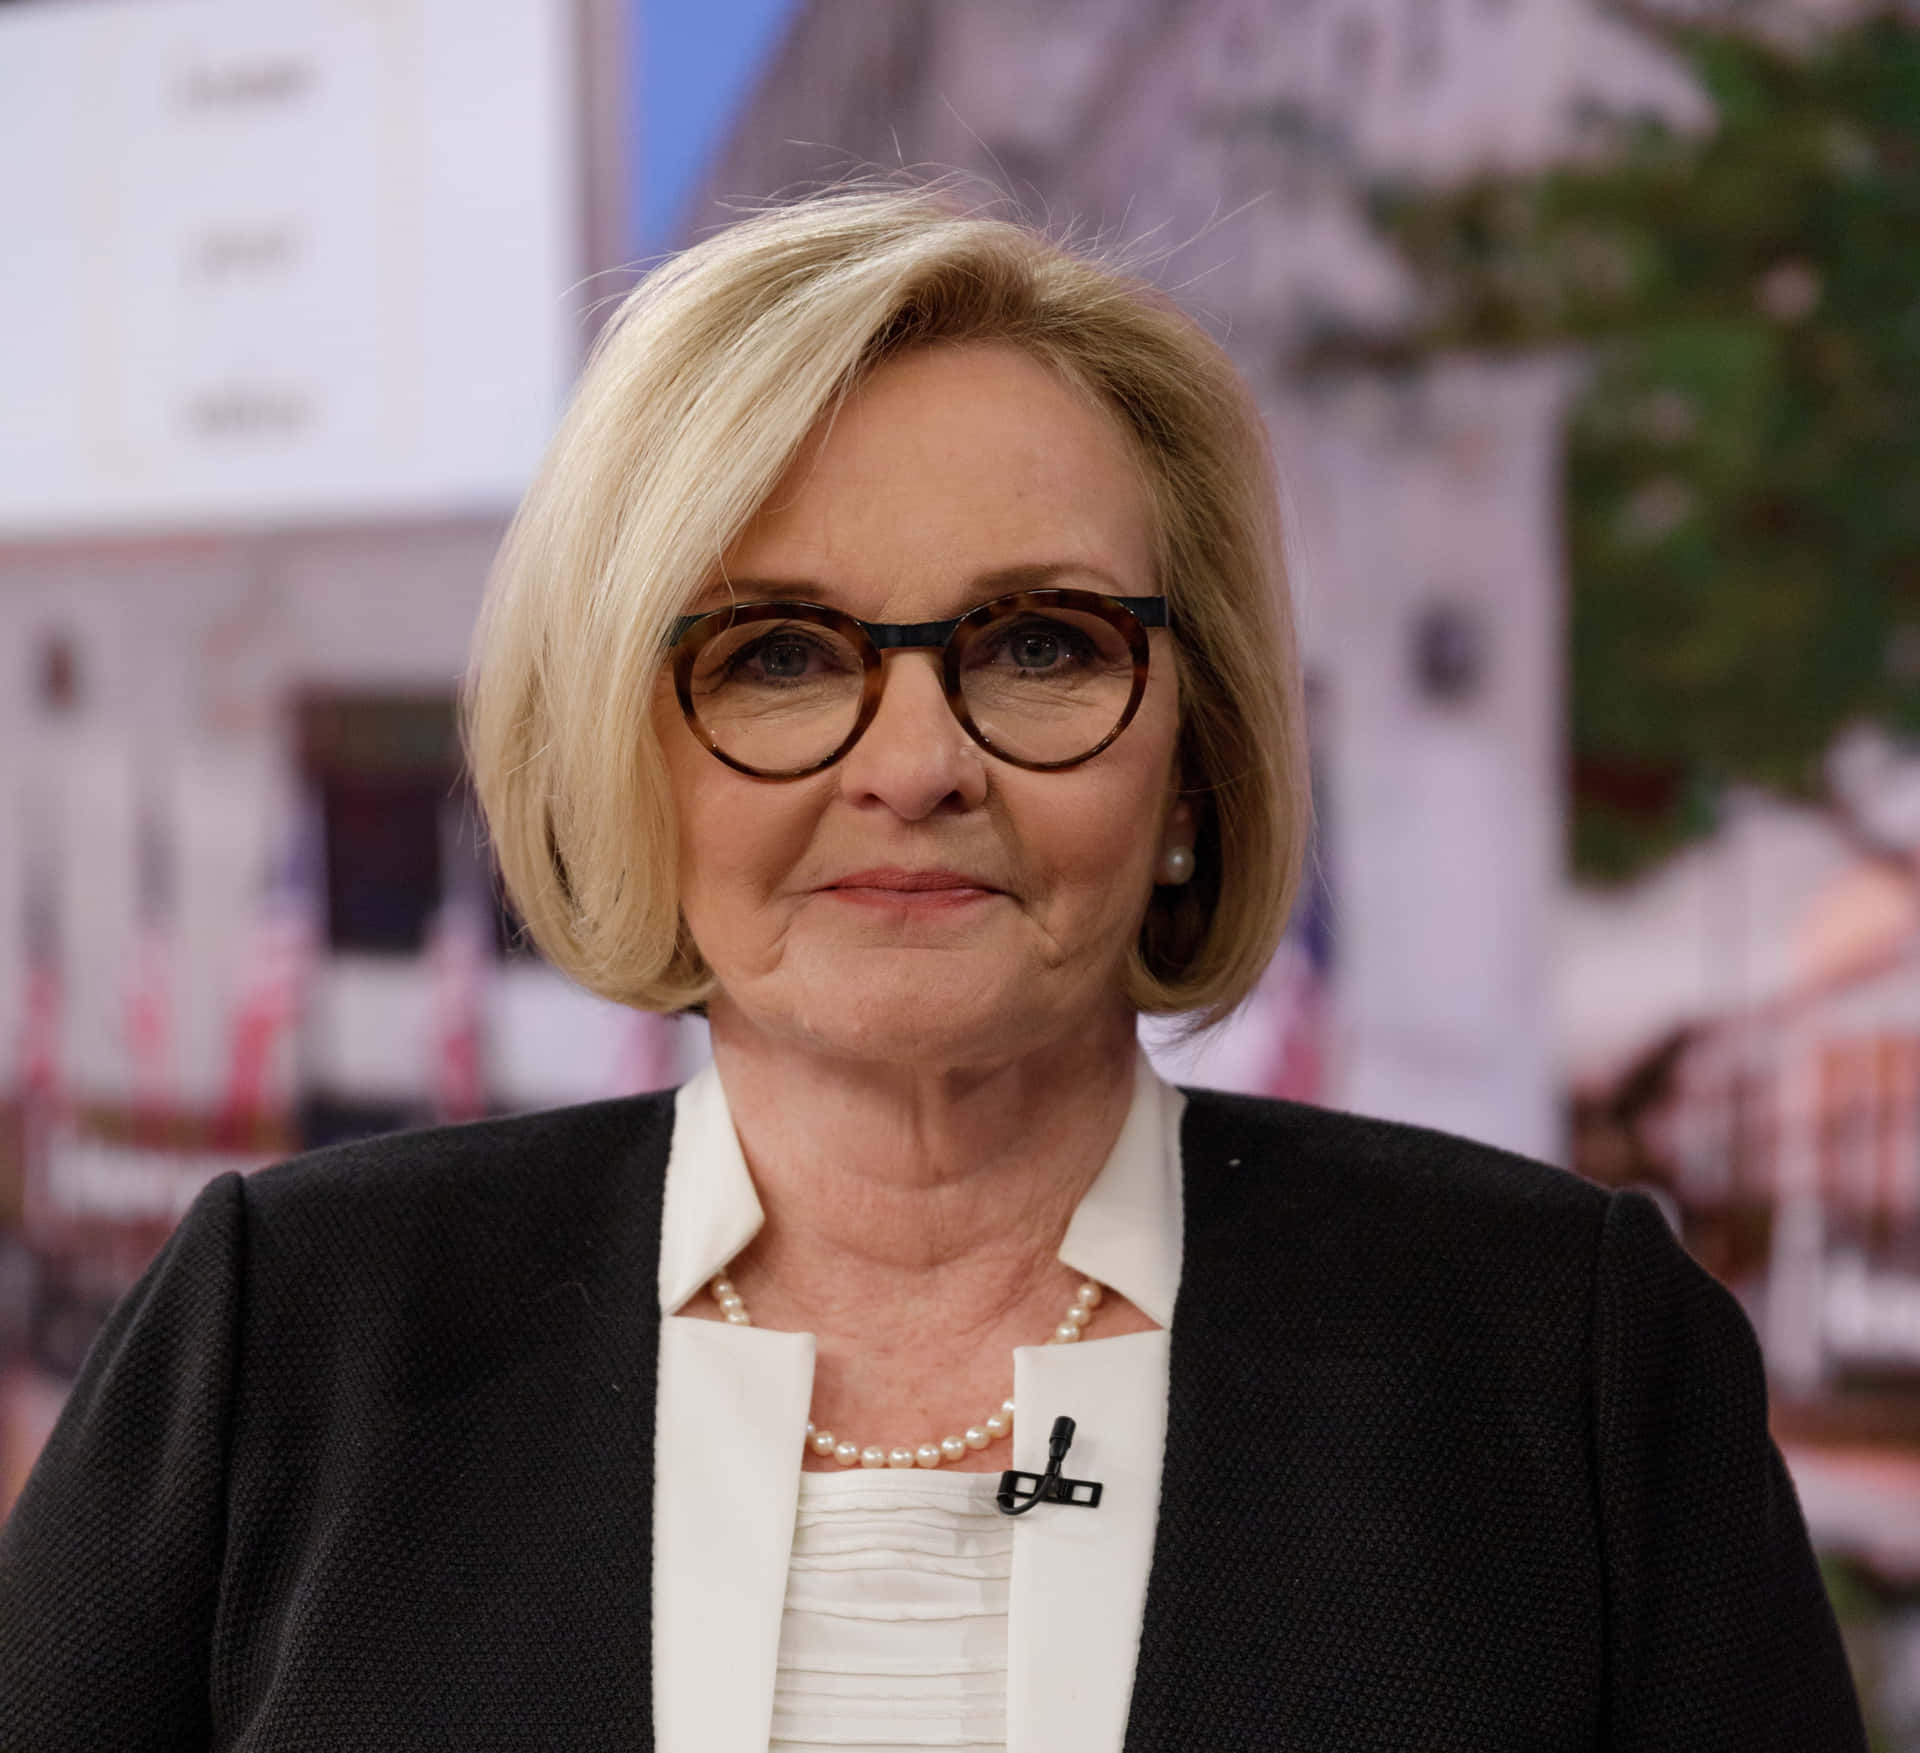 Claire Mccaskill With Pursed Lips Wallpaper